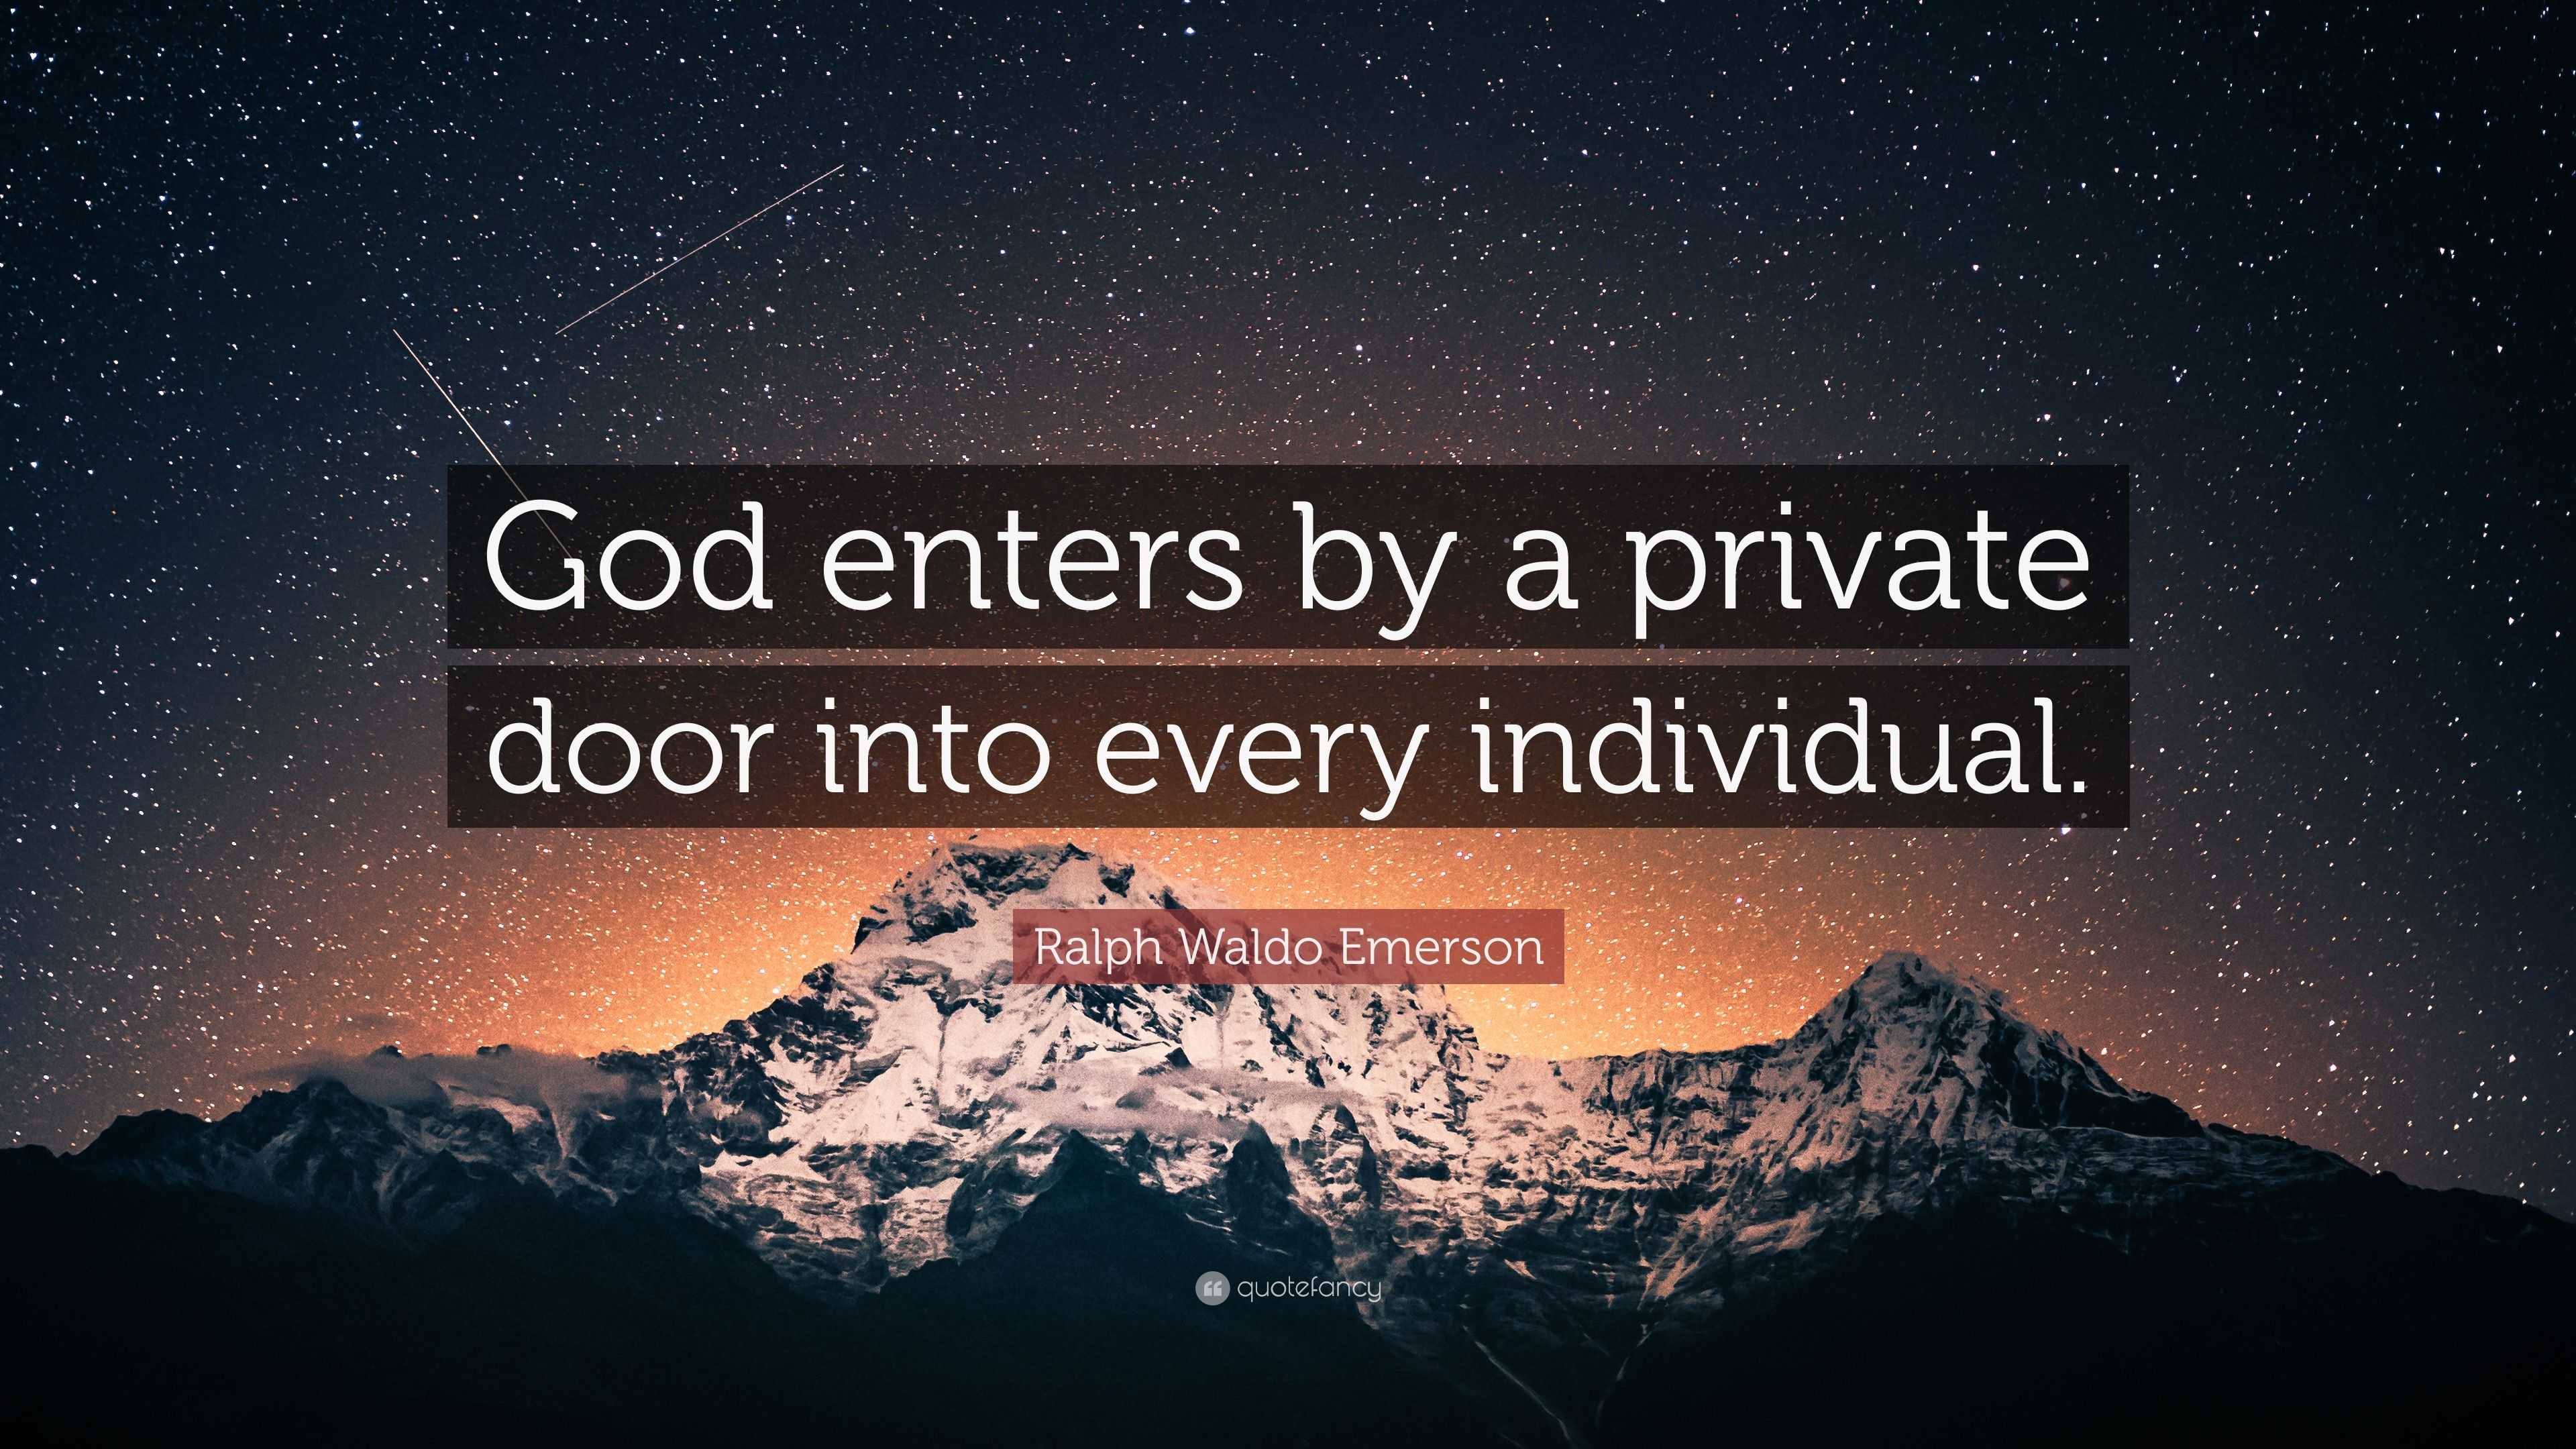 https://quotefancy.com/media/wallpaper/3840x2160/4793112-Ralph-Waldo-Emerson-Quote-God-enters-by-a-private-door-into-every.jpg